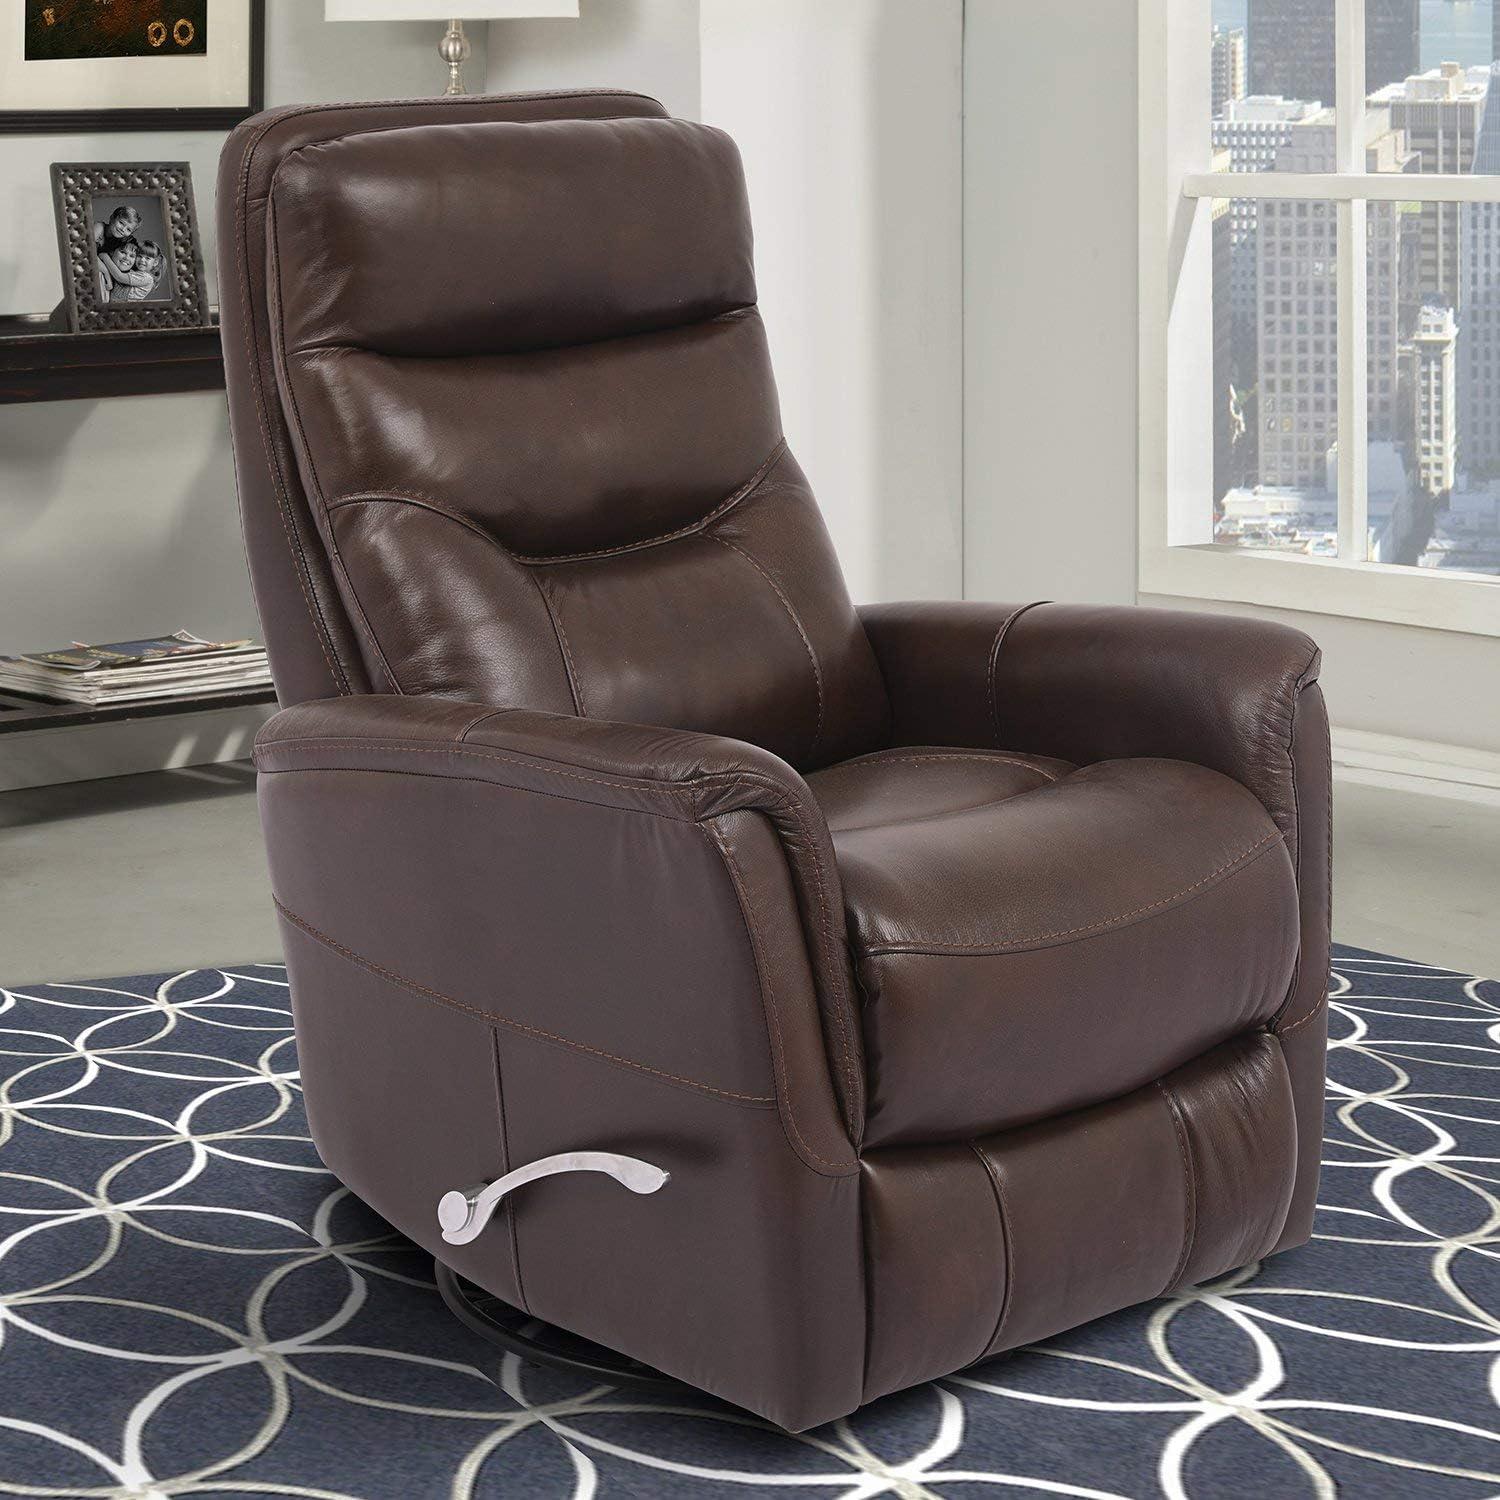 Traditional Brown Leather Swivel Recliner with Wood Accents